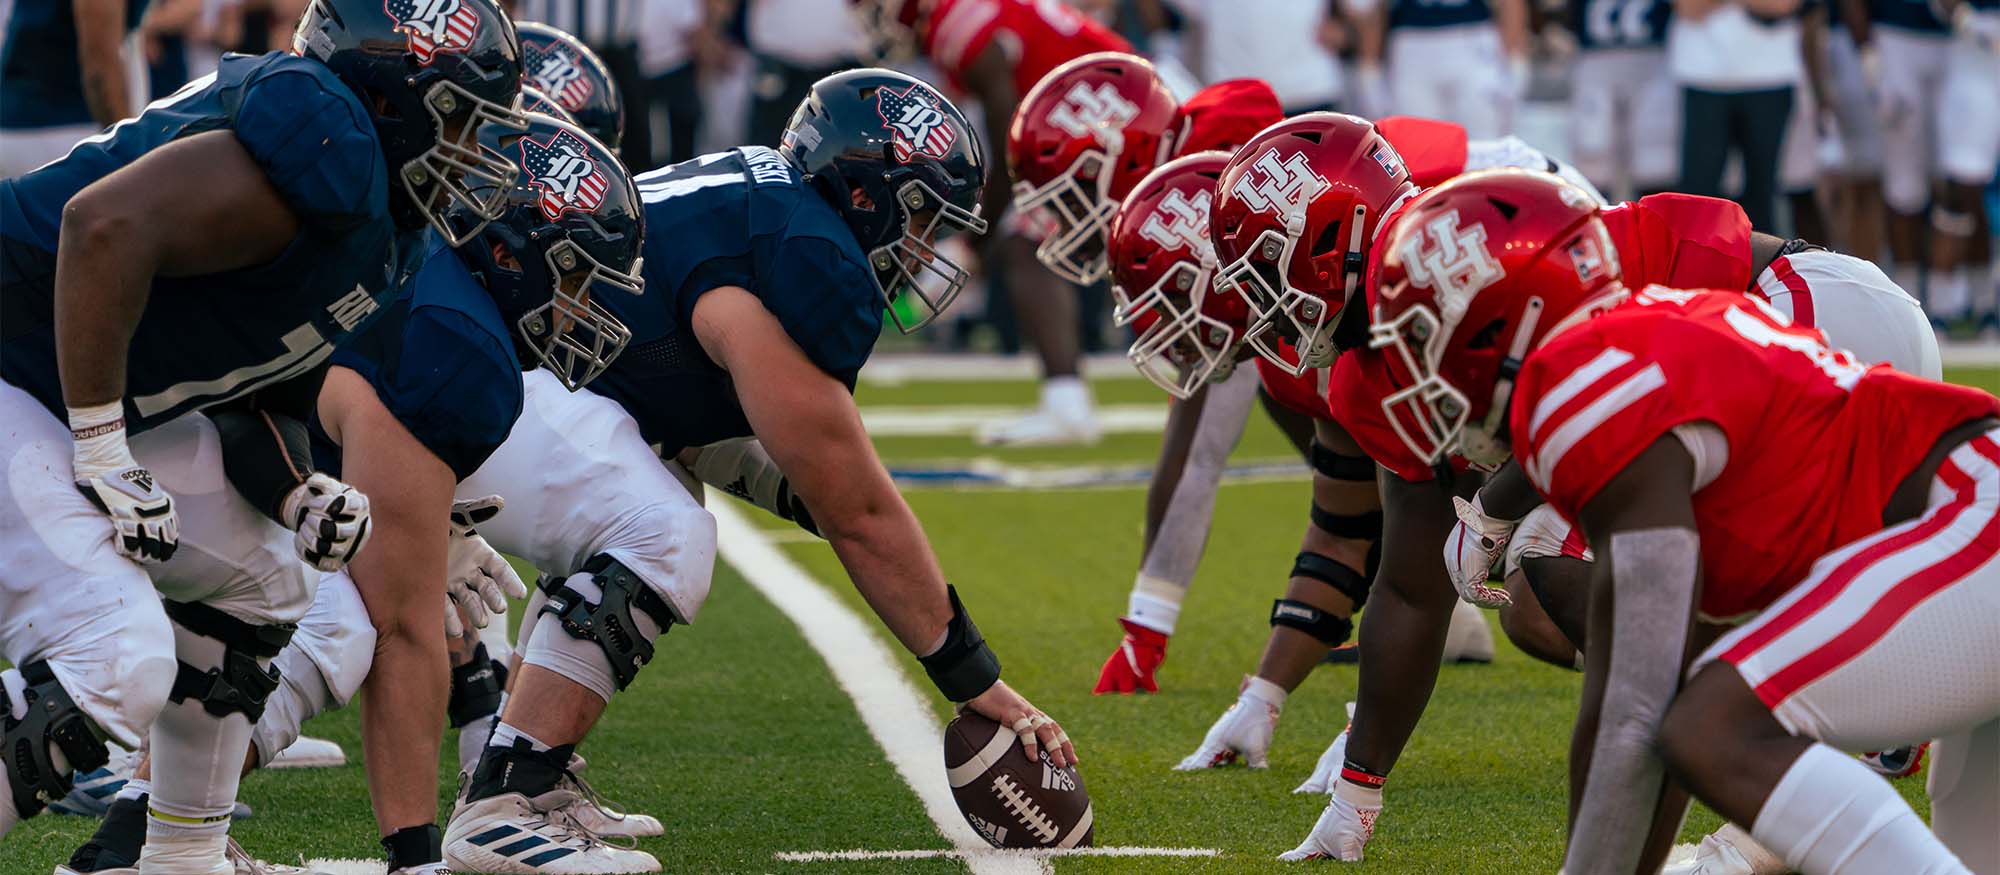 The Rice offensive line on the left faces the University of Houston defensive line on the right, as Rice is about to snap the ball.